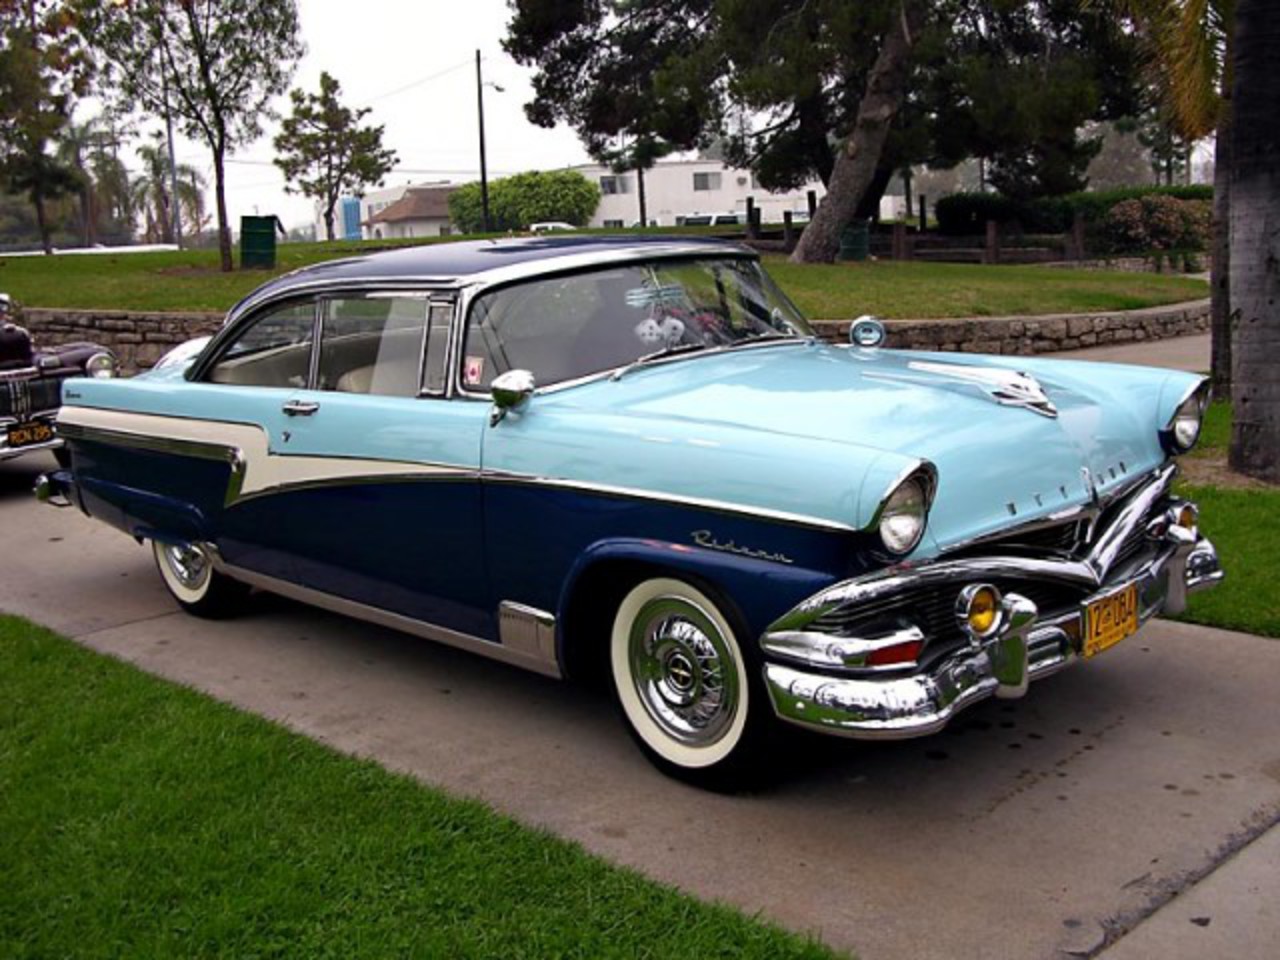 lord_k: 1956 Ford Motor Company Cars of the Day